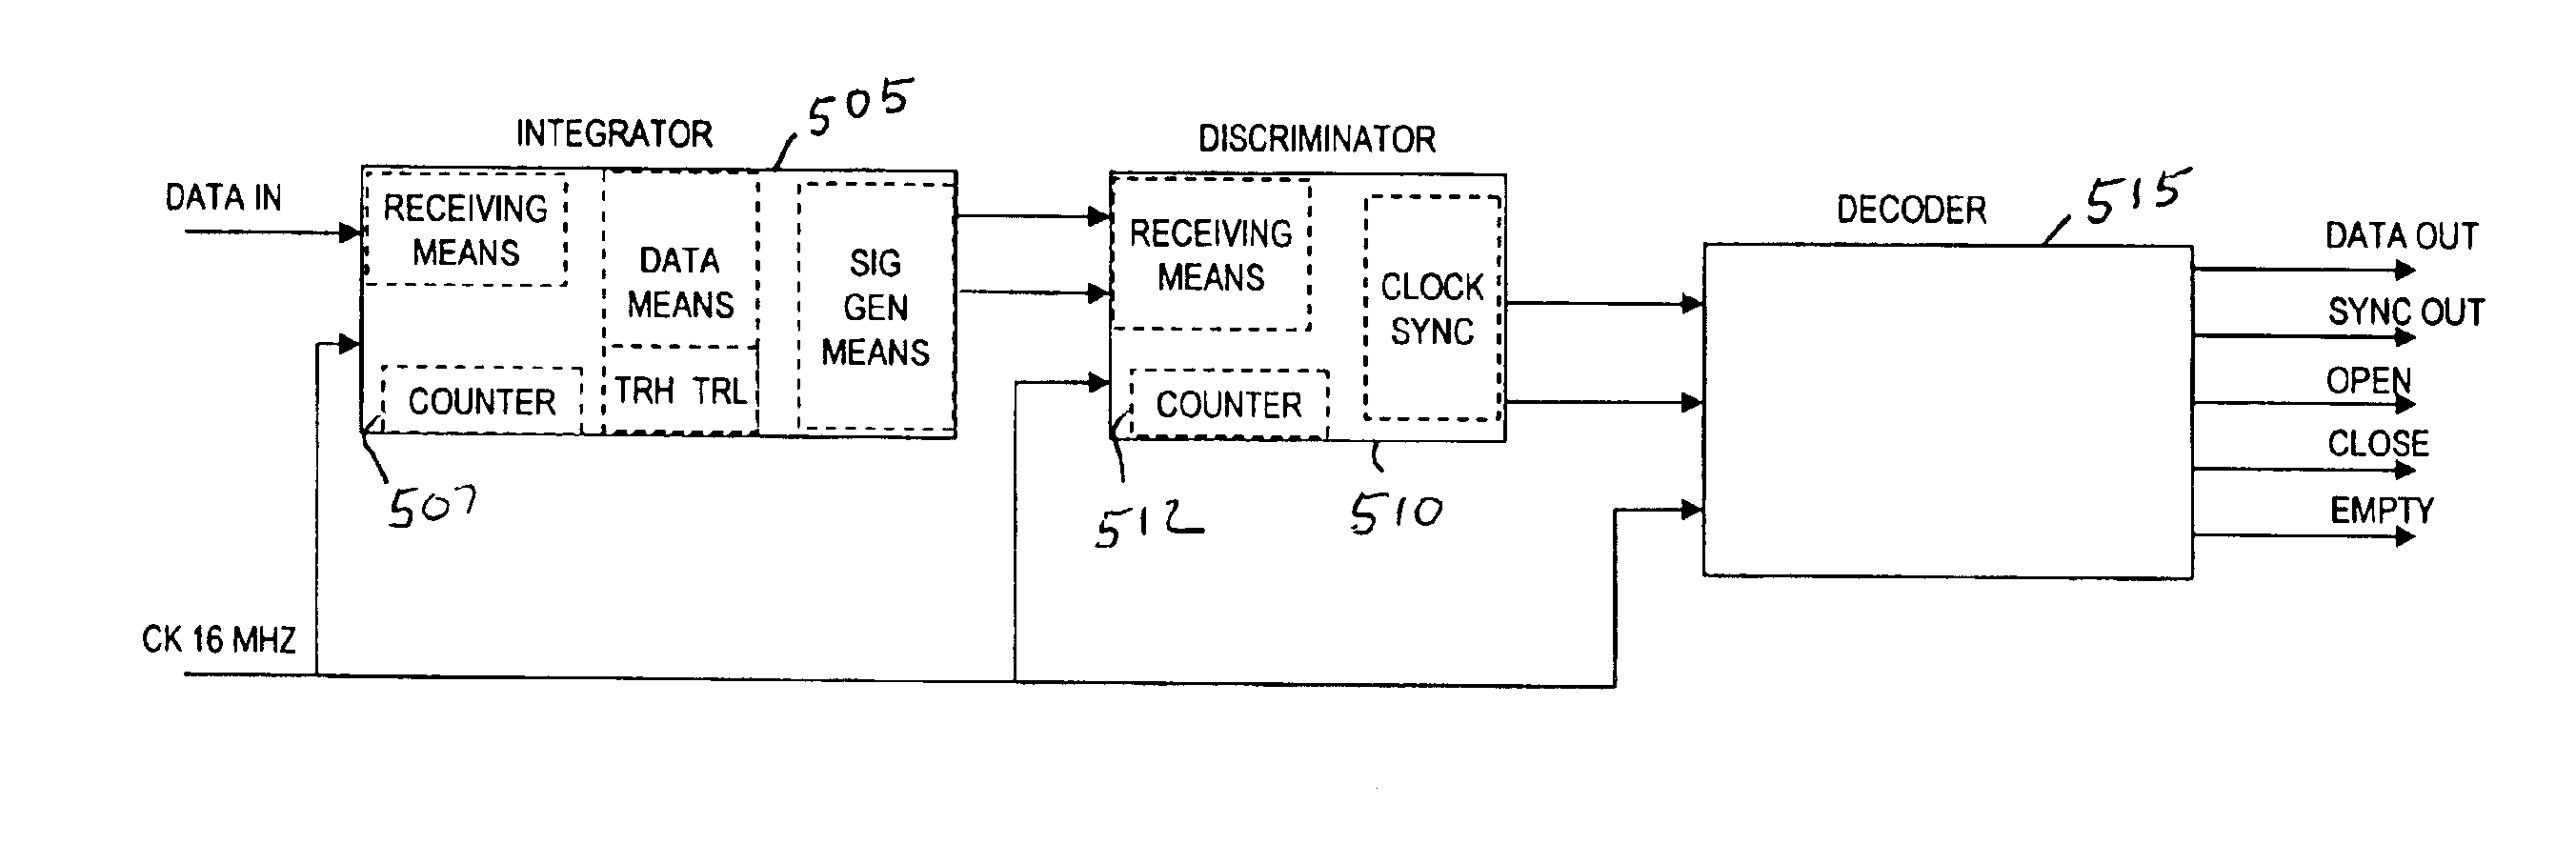 Encoding and decoding system